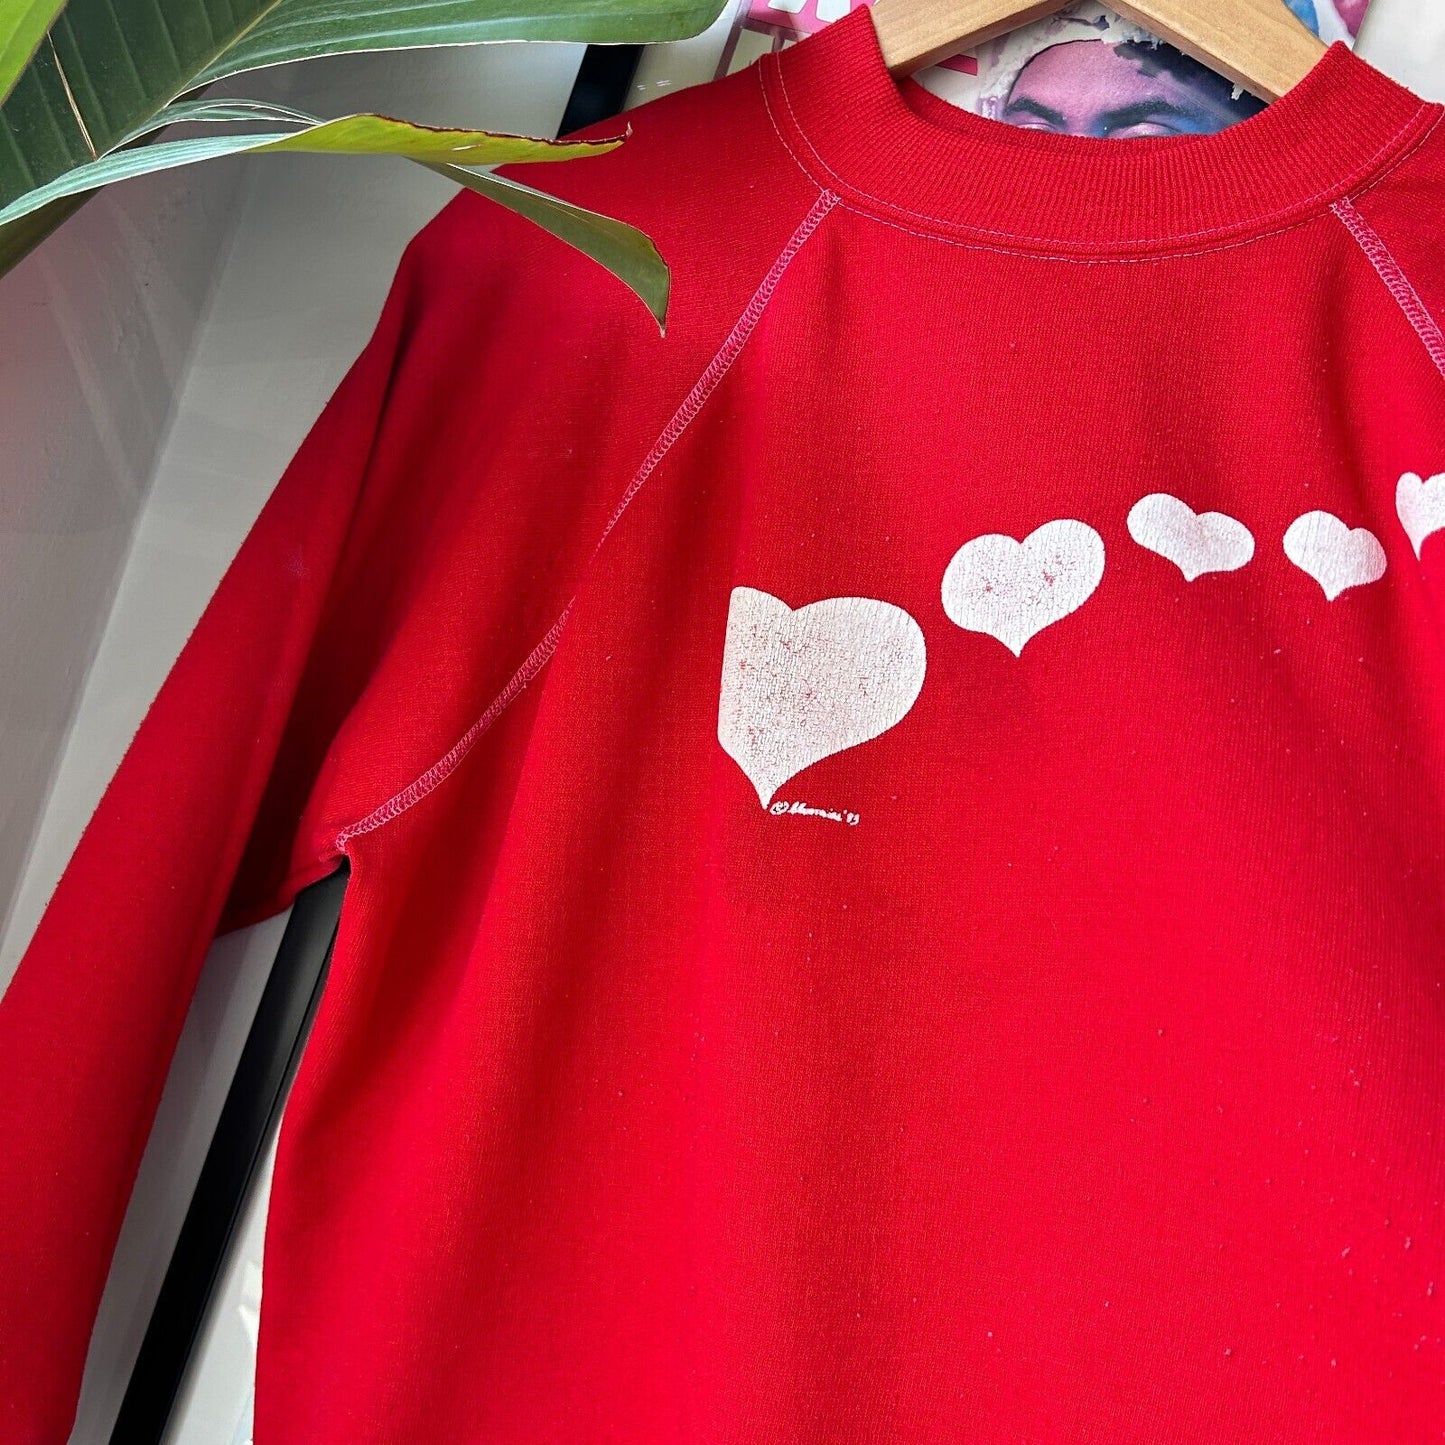 VINTAGE 80s | Flying Hearts Red Crewneck Sweater sz L Adult